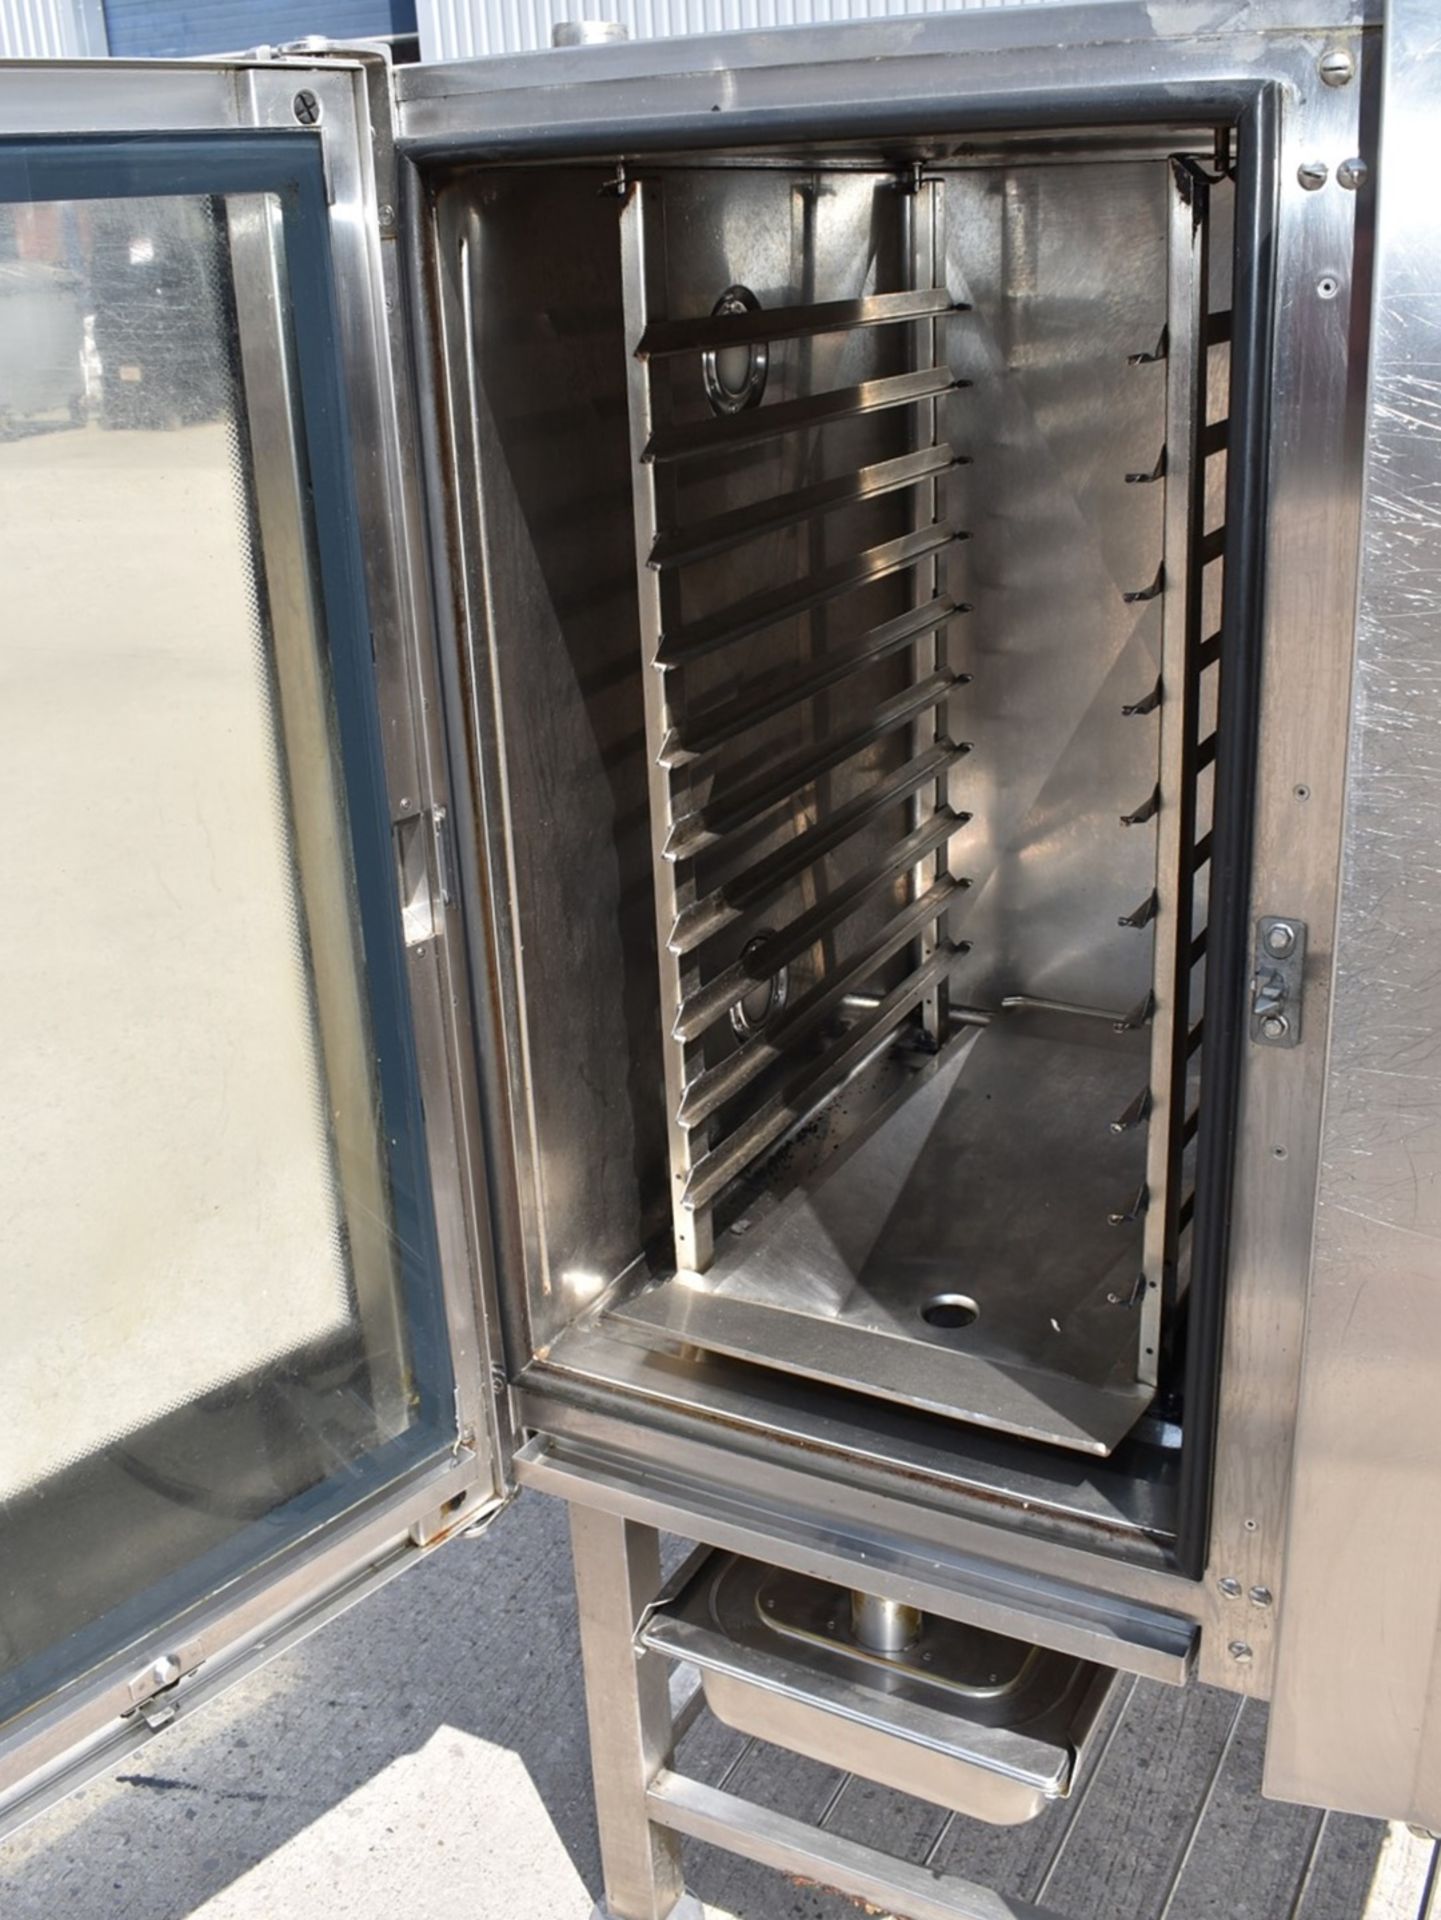 1 x Houno CPE 1.06 Electric Combi Oven - 3 Phase Combi Oven With Various Pre-Set Cooking Options - Image 14 of 14